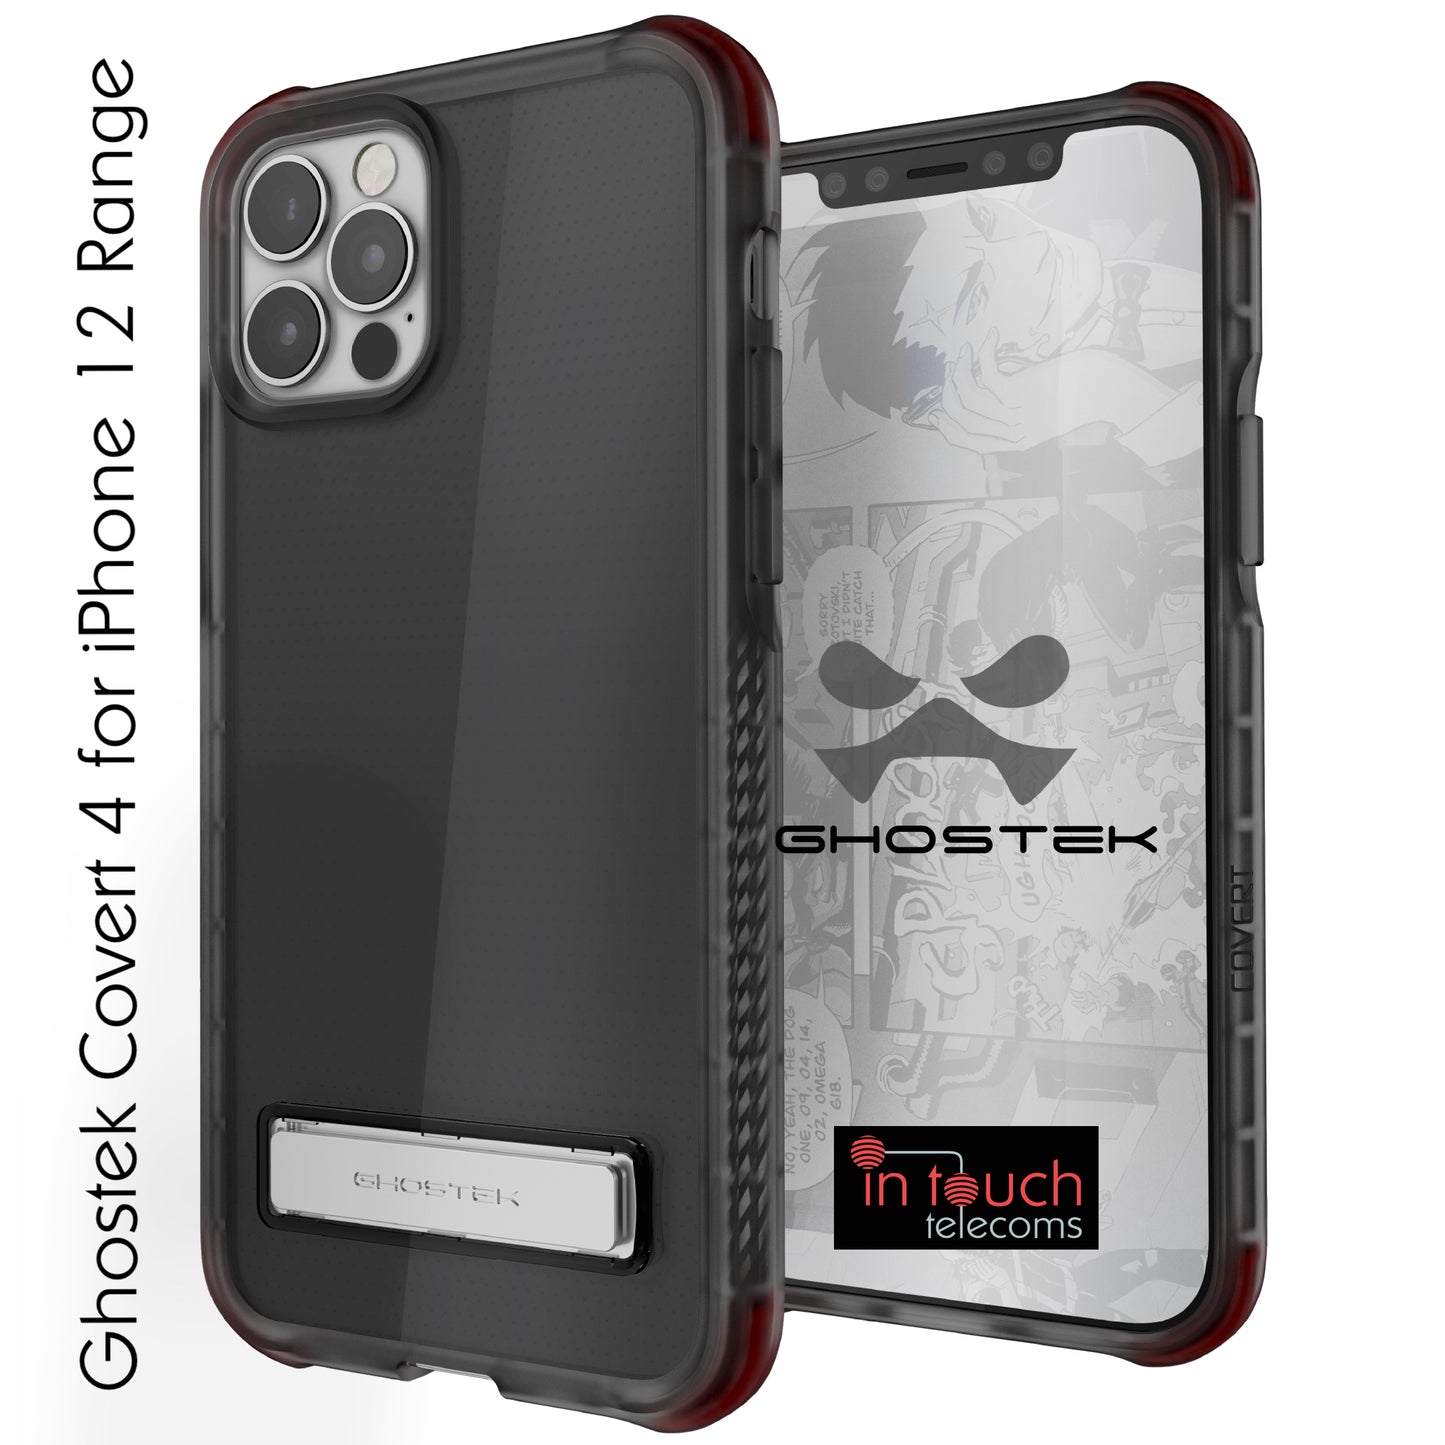 Ghostek Covert 4 Case for iPhone 12 Pro Max (6.7) | Military Grade